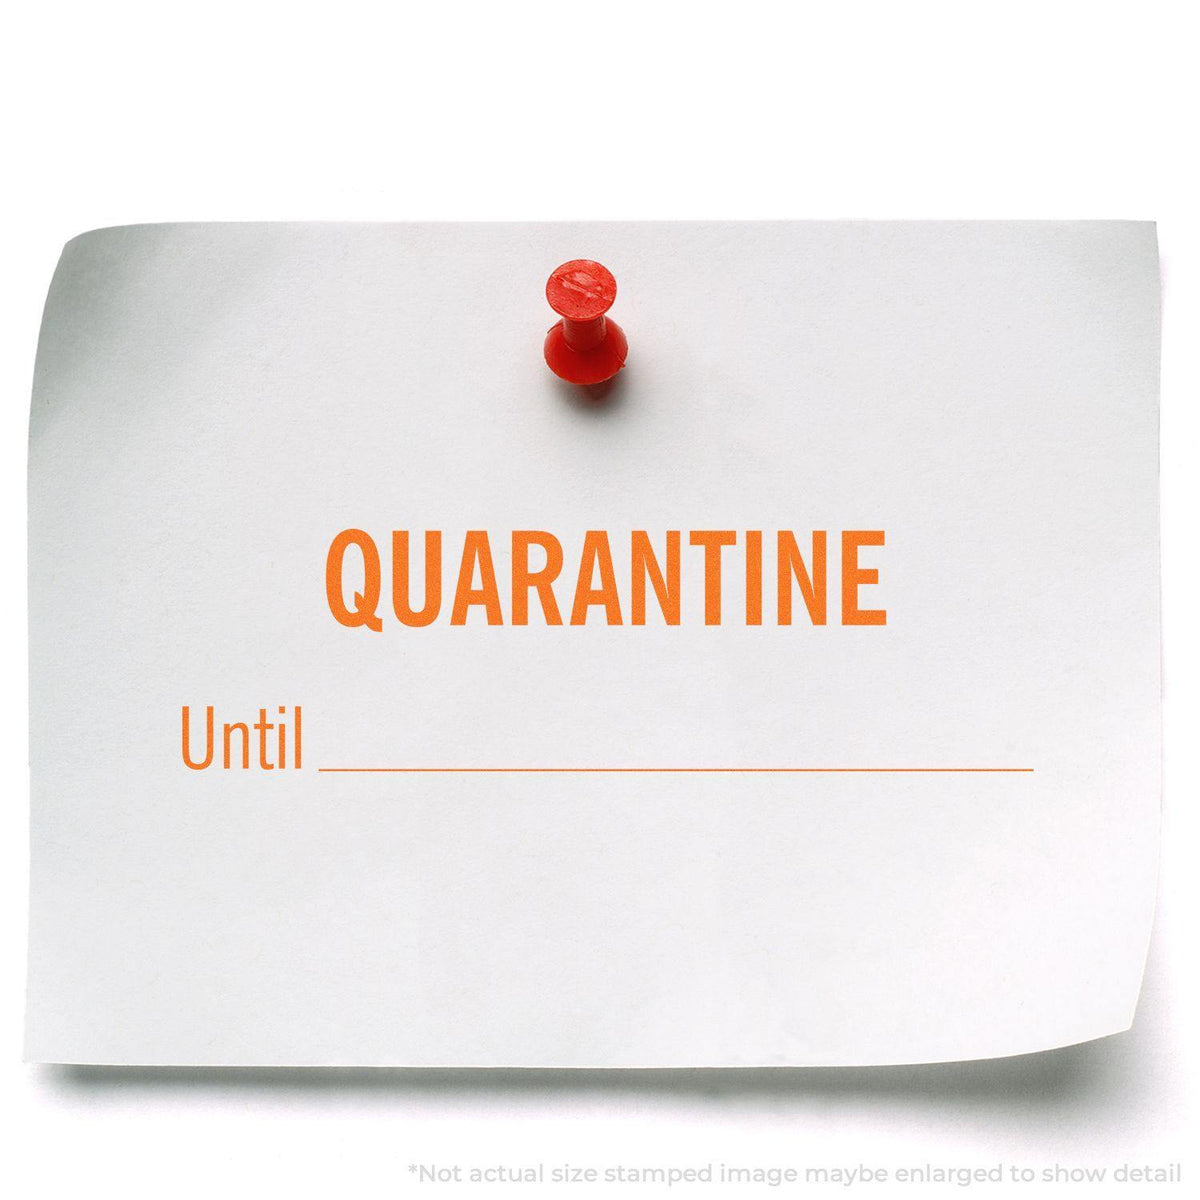 Large Quarantine Until Rubber Stamp In Use Photo